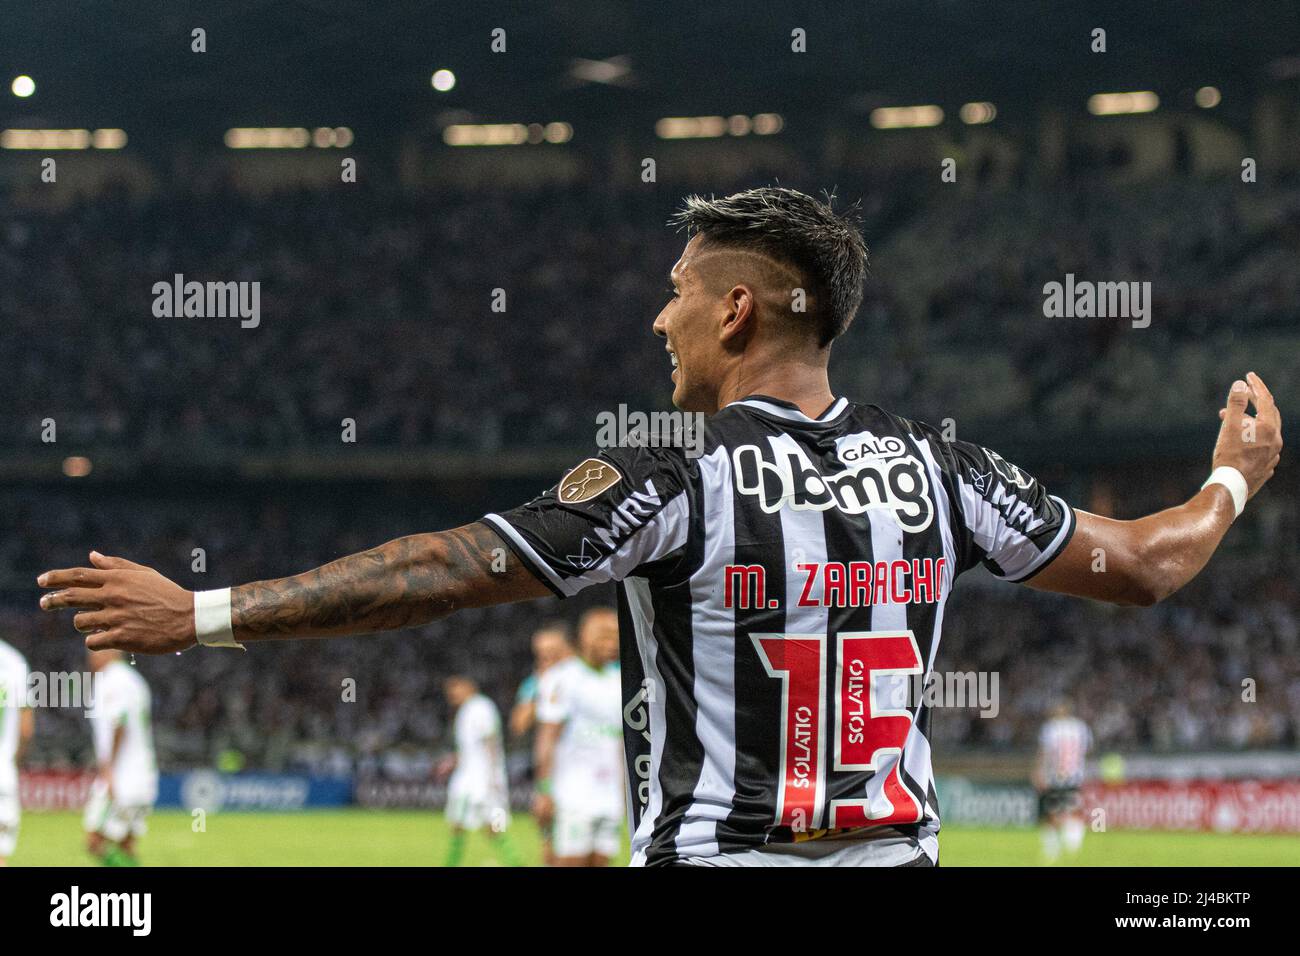 Belo Horizonte, Brazil. 13th Apr, 2022. MG - Belo Horizonte - 04/13/2022 - LIBERTADORES 2022 ATLETICO -MG X AMERICA-MG - Zaracho player for Atletico-MG during a match against America-MG at Mineirao stadium for the Copa Libertadores 2022 championship. Photo: Alessandra Torres/AGIF Credit: AGIF/Alamy Live News Stock Photo